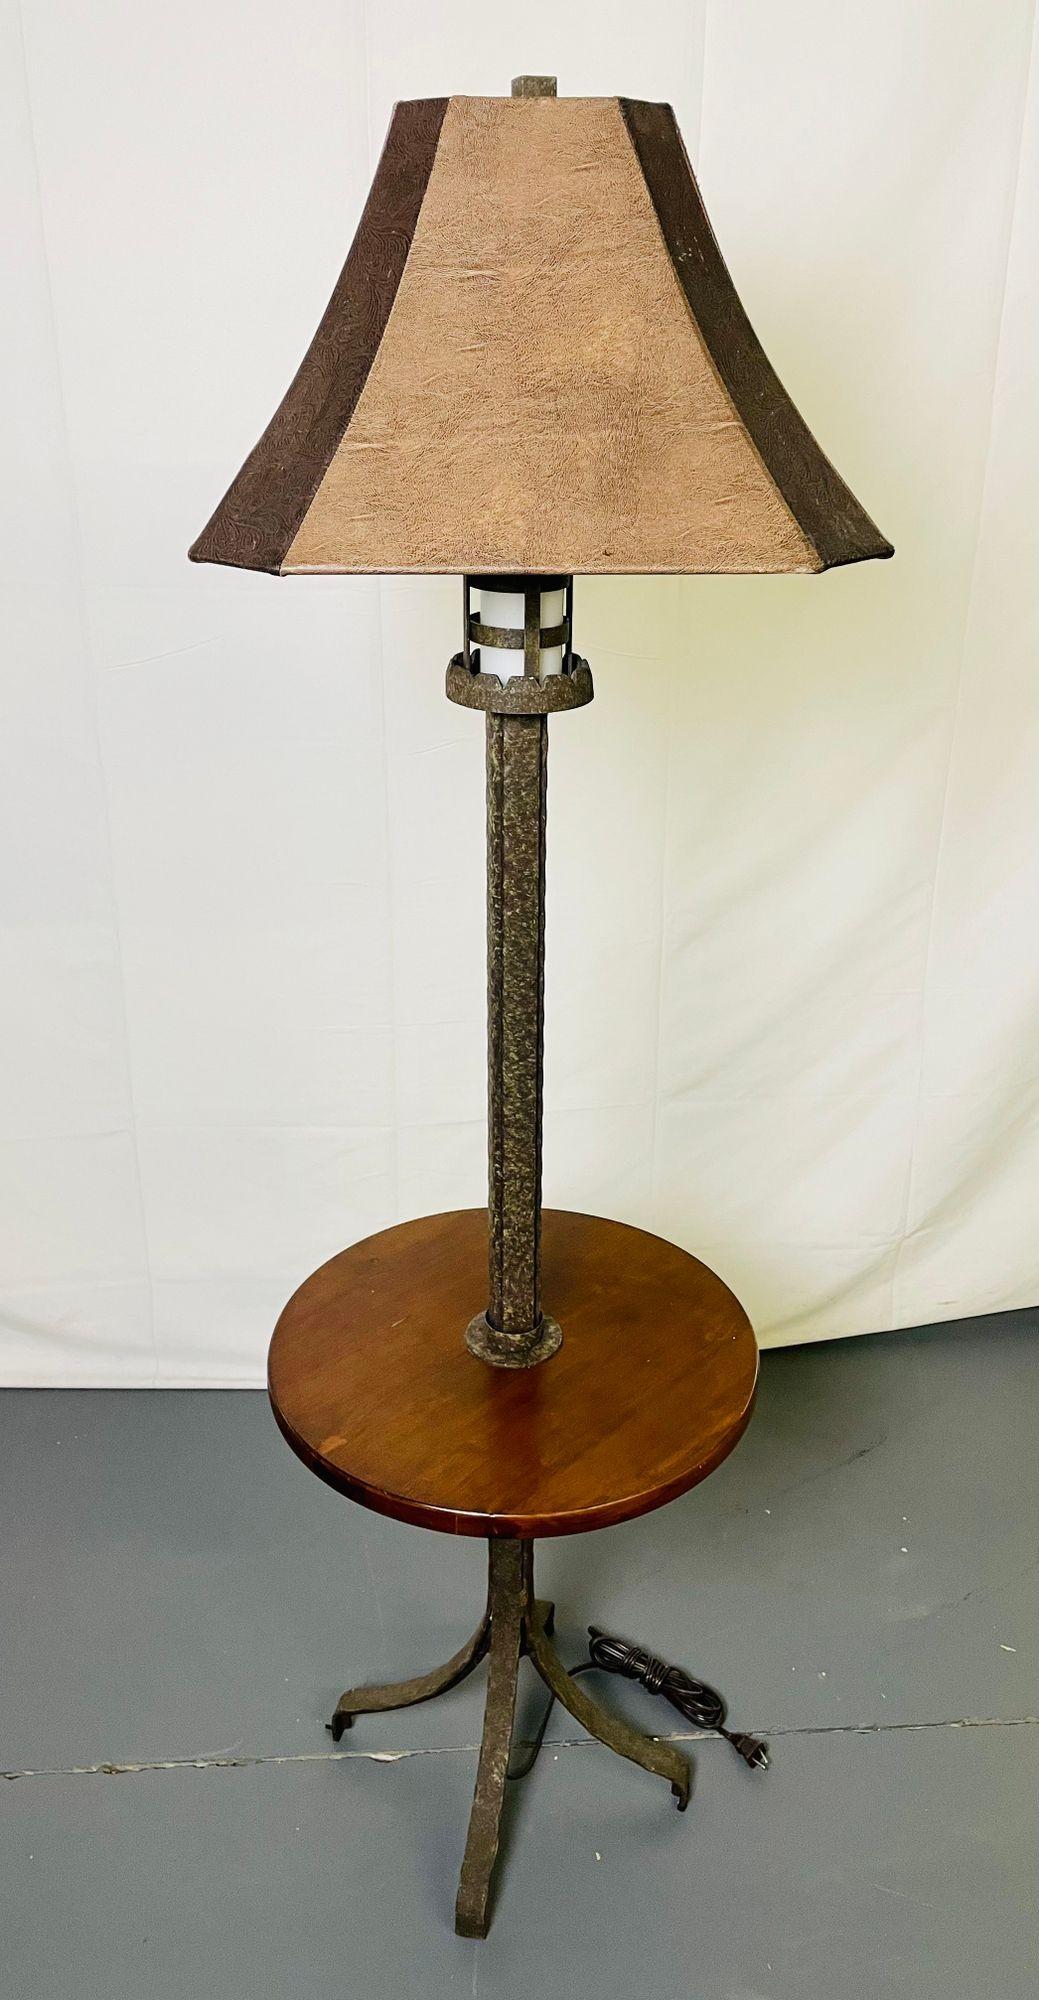 Mid-Century Modern standing floor, table lamp, Oscar Bach
 
Attributed to Oscar Bach, this stunning floor lamp has a tastefully rustic, hammered metal surface treatment and coordinating shade of hand-tooled leather. At the top is a gothically